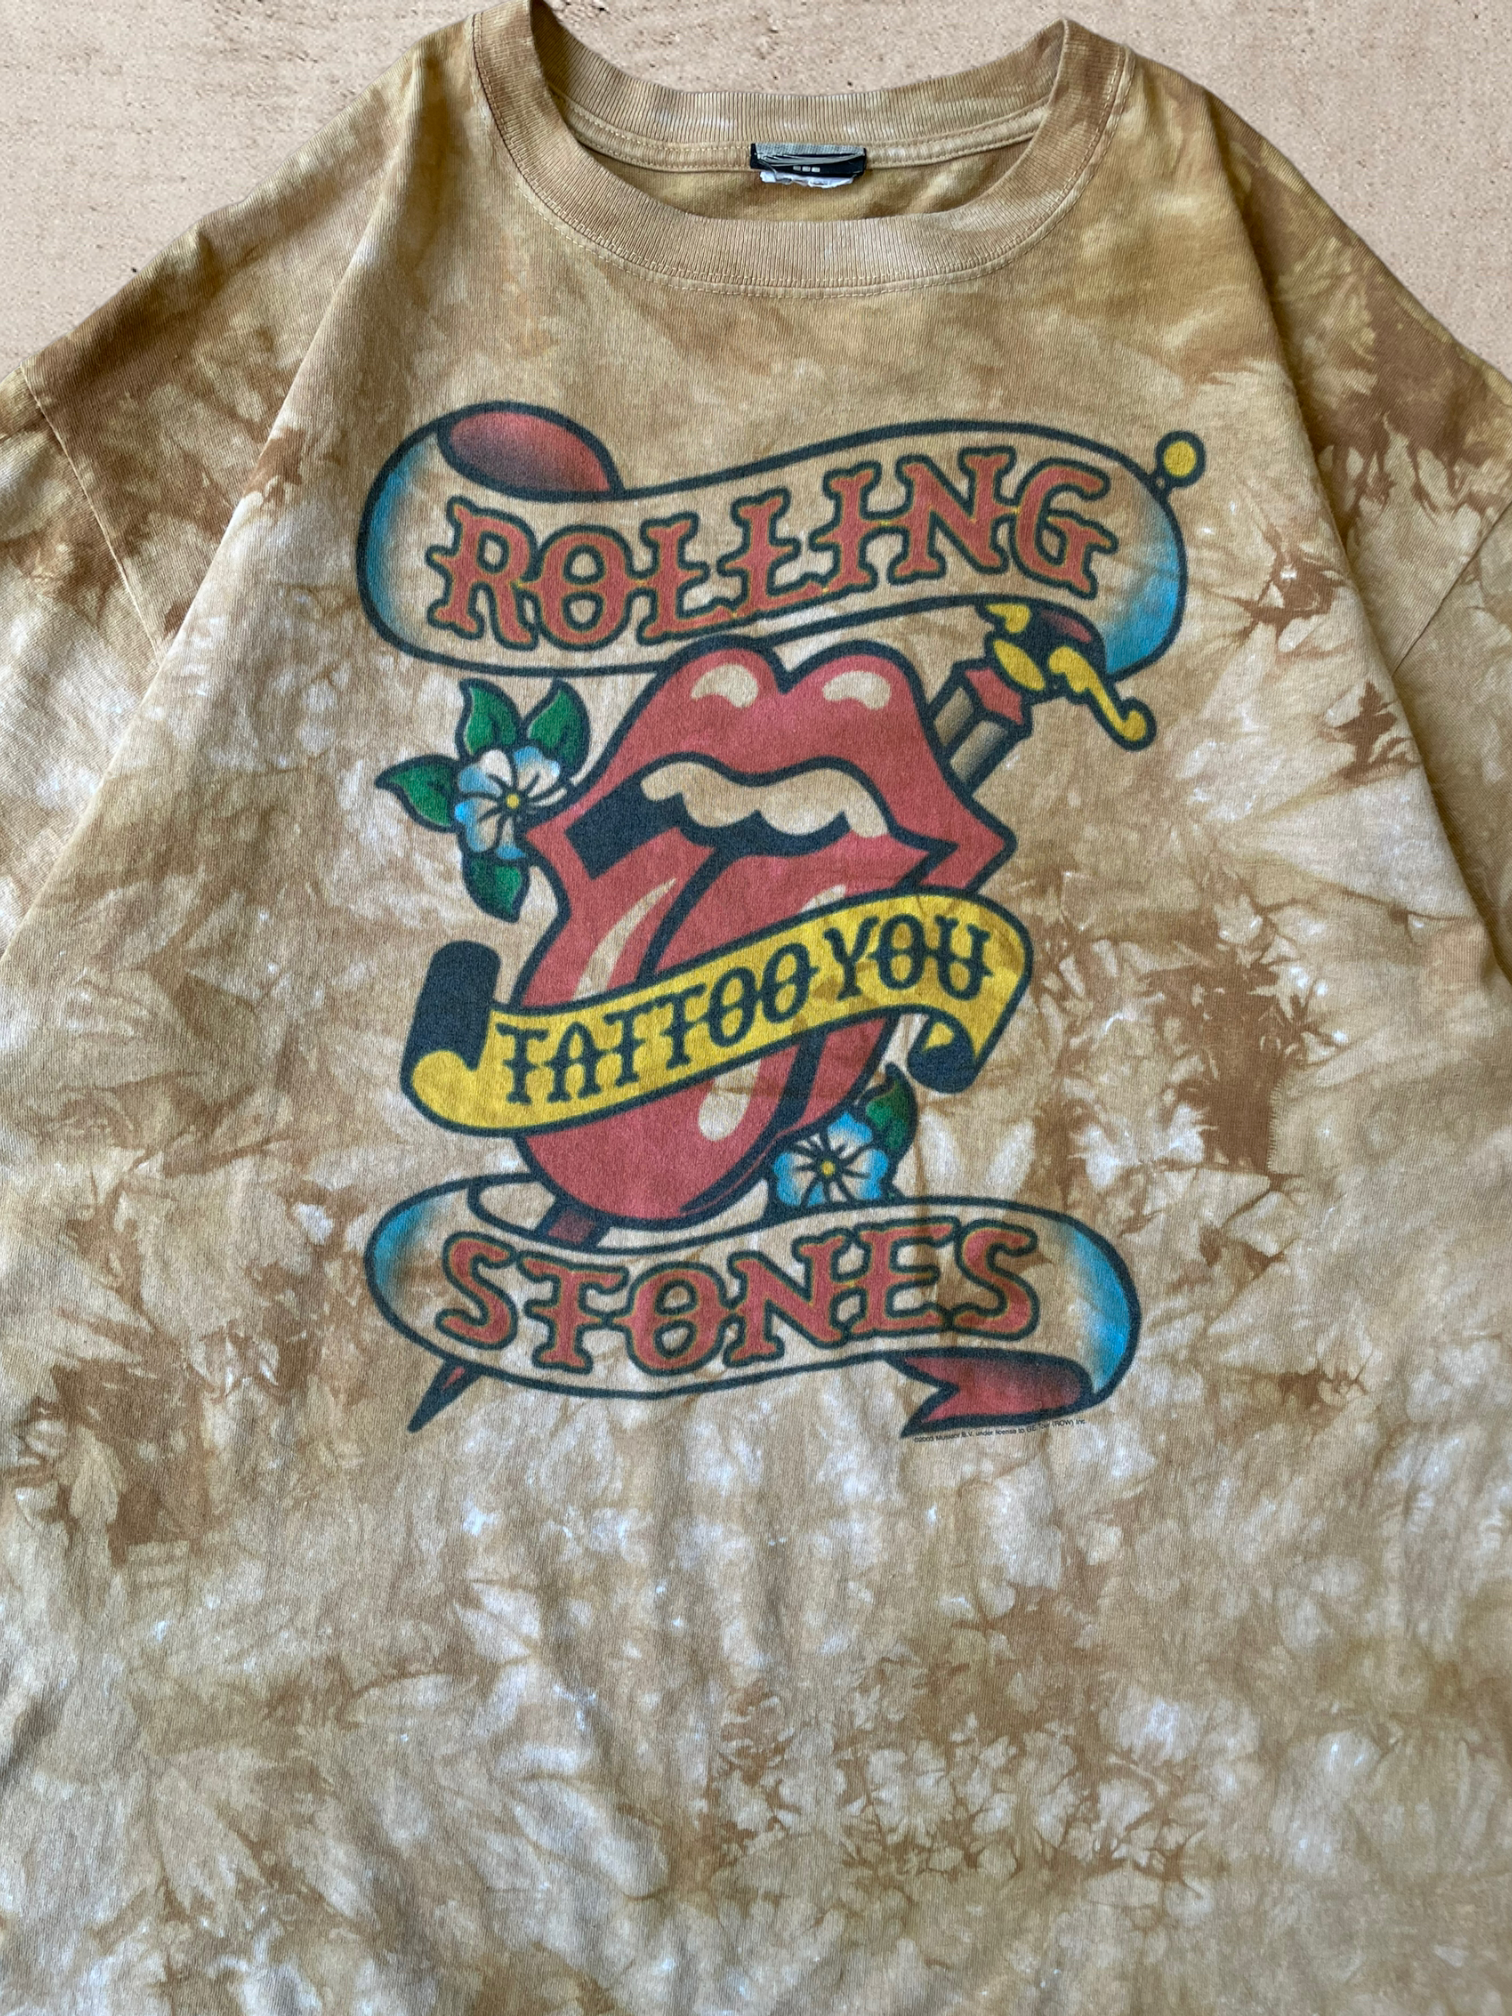 2003 Rolling Stones Tattoo You T-Shirt - X-Large